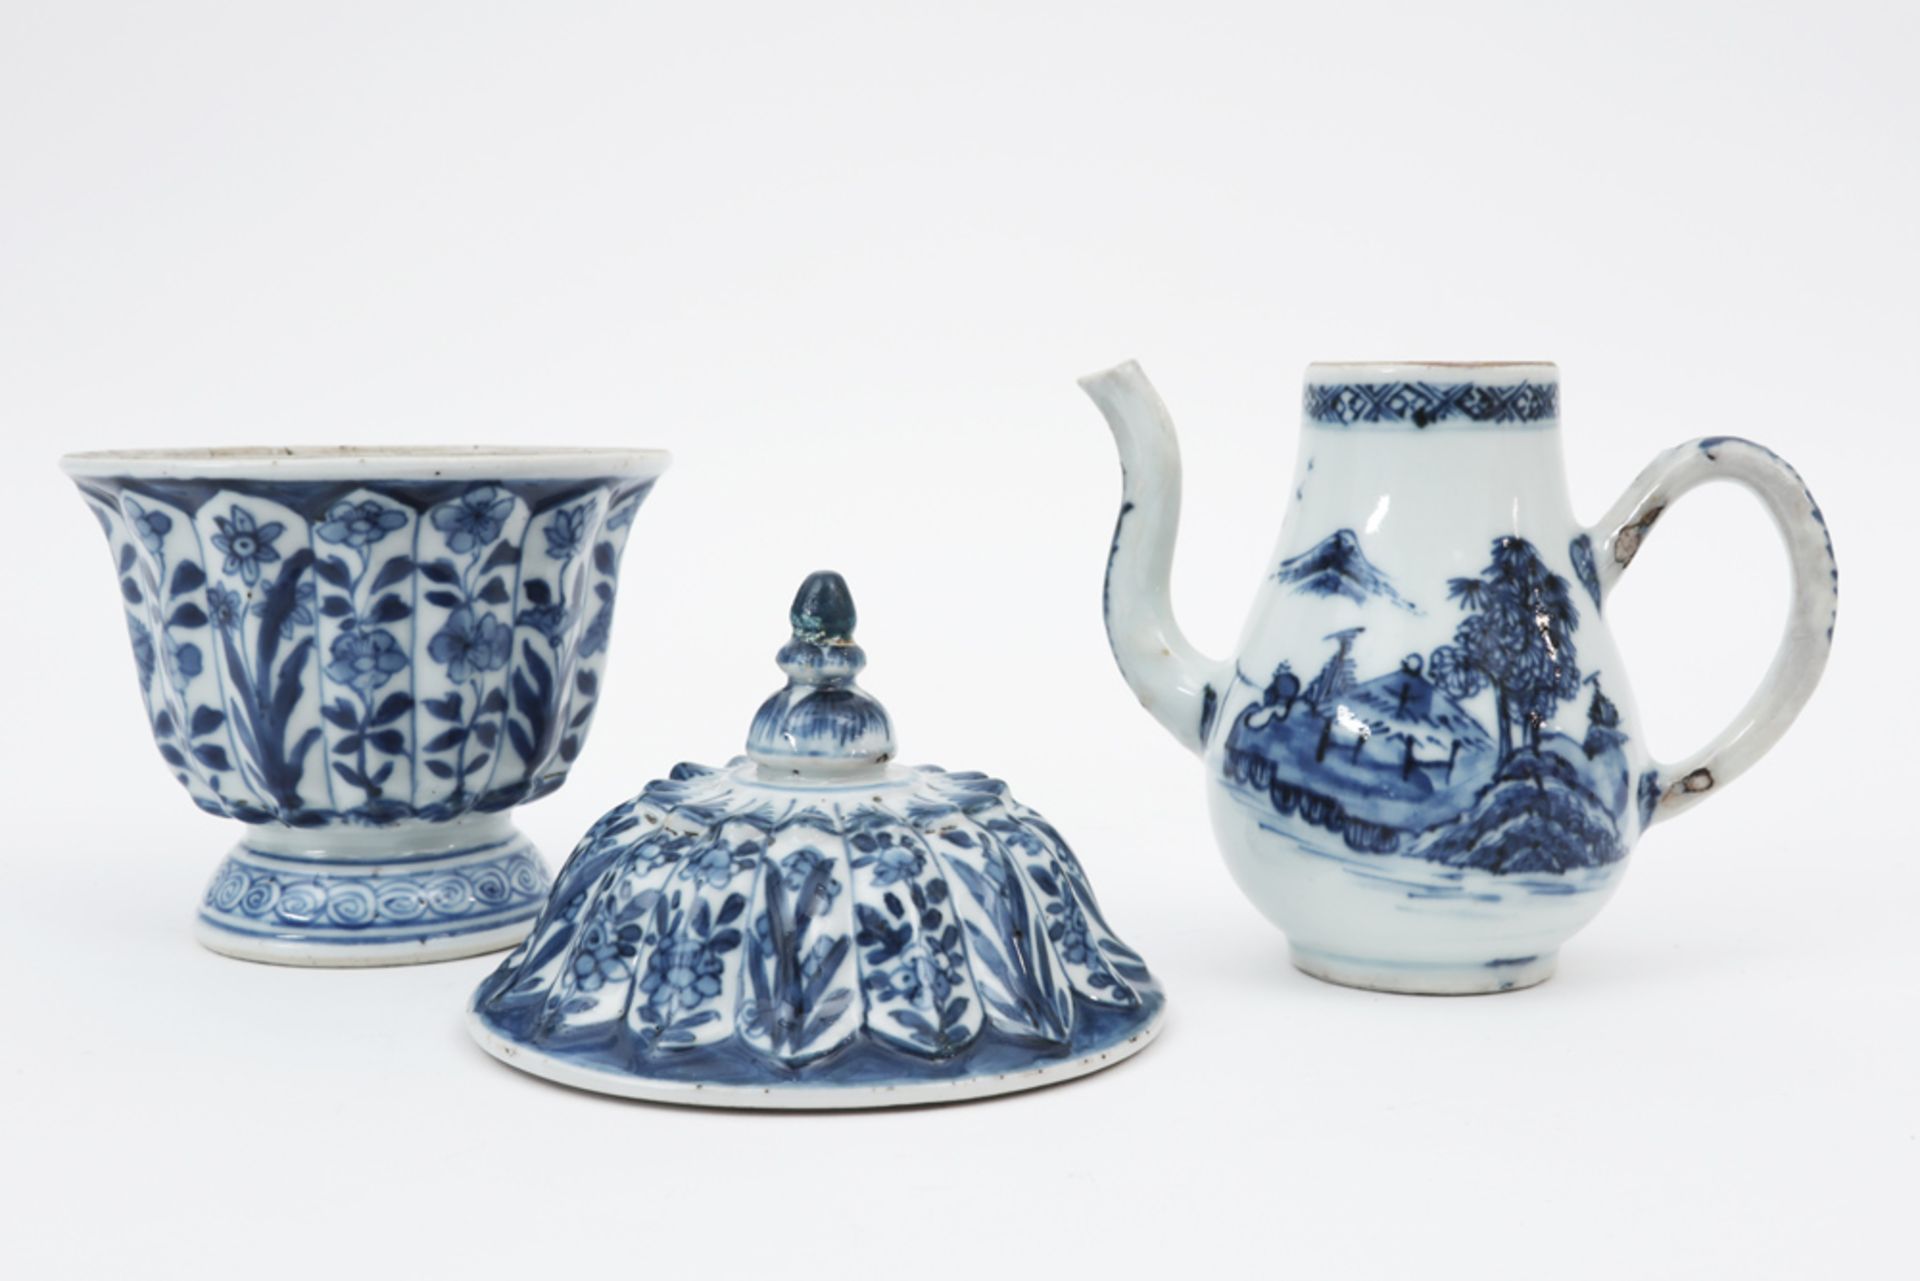 two pieces of 18th Cent. Chinese porcelain with a blue-white dcor : a small jug and a Kang Hsi - Image 2 of 4